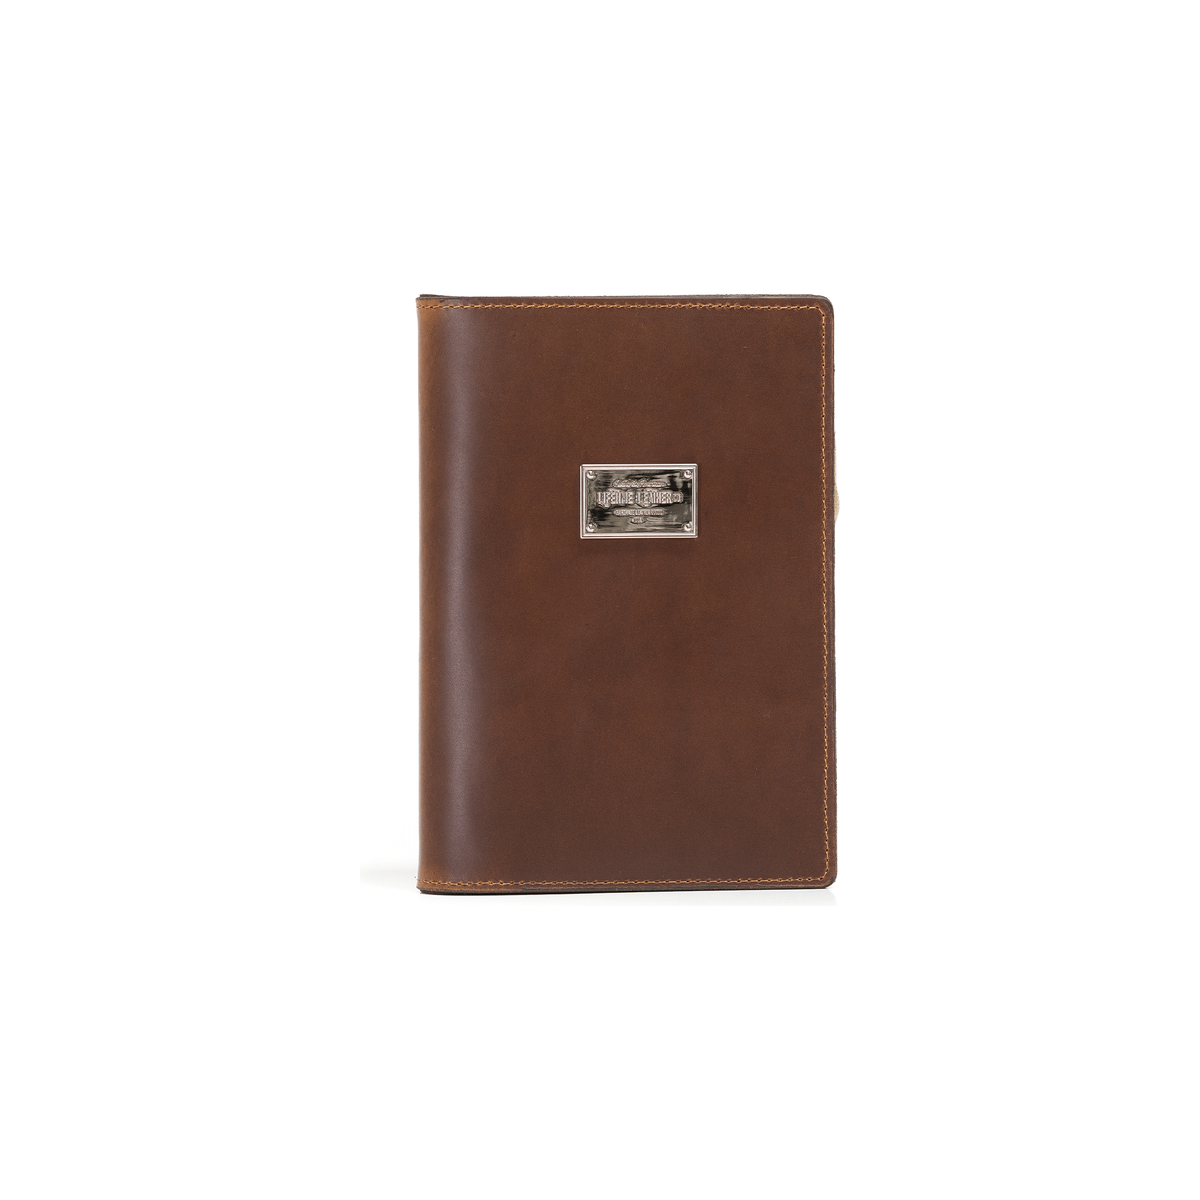 Leather Steno Pad by Lifetime Leather Co